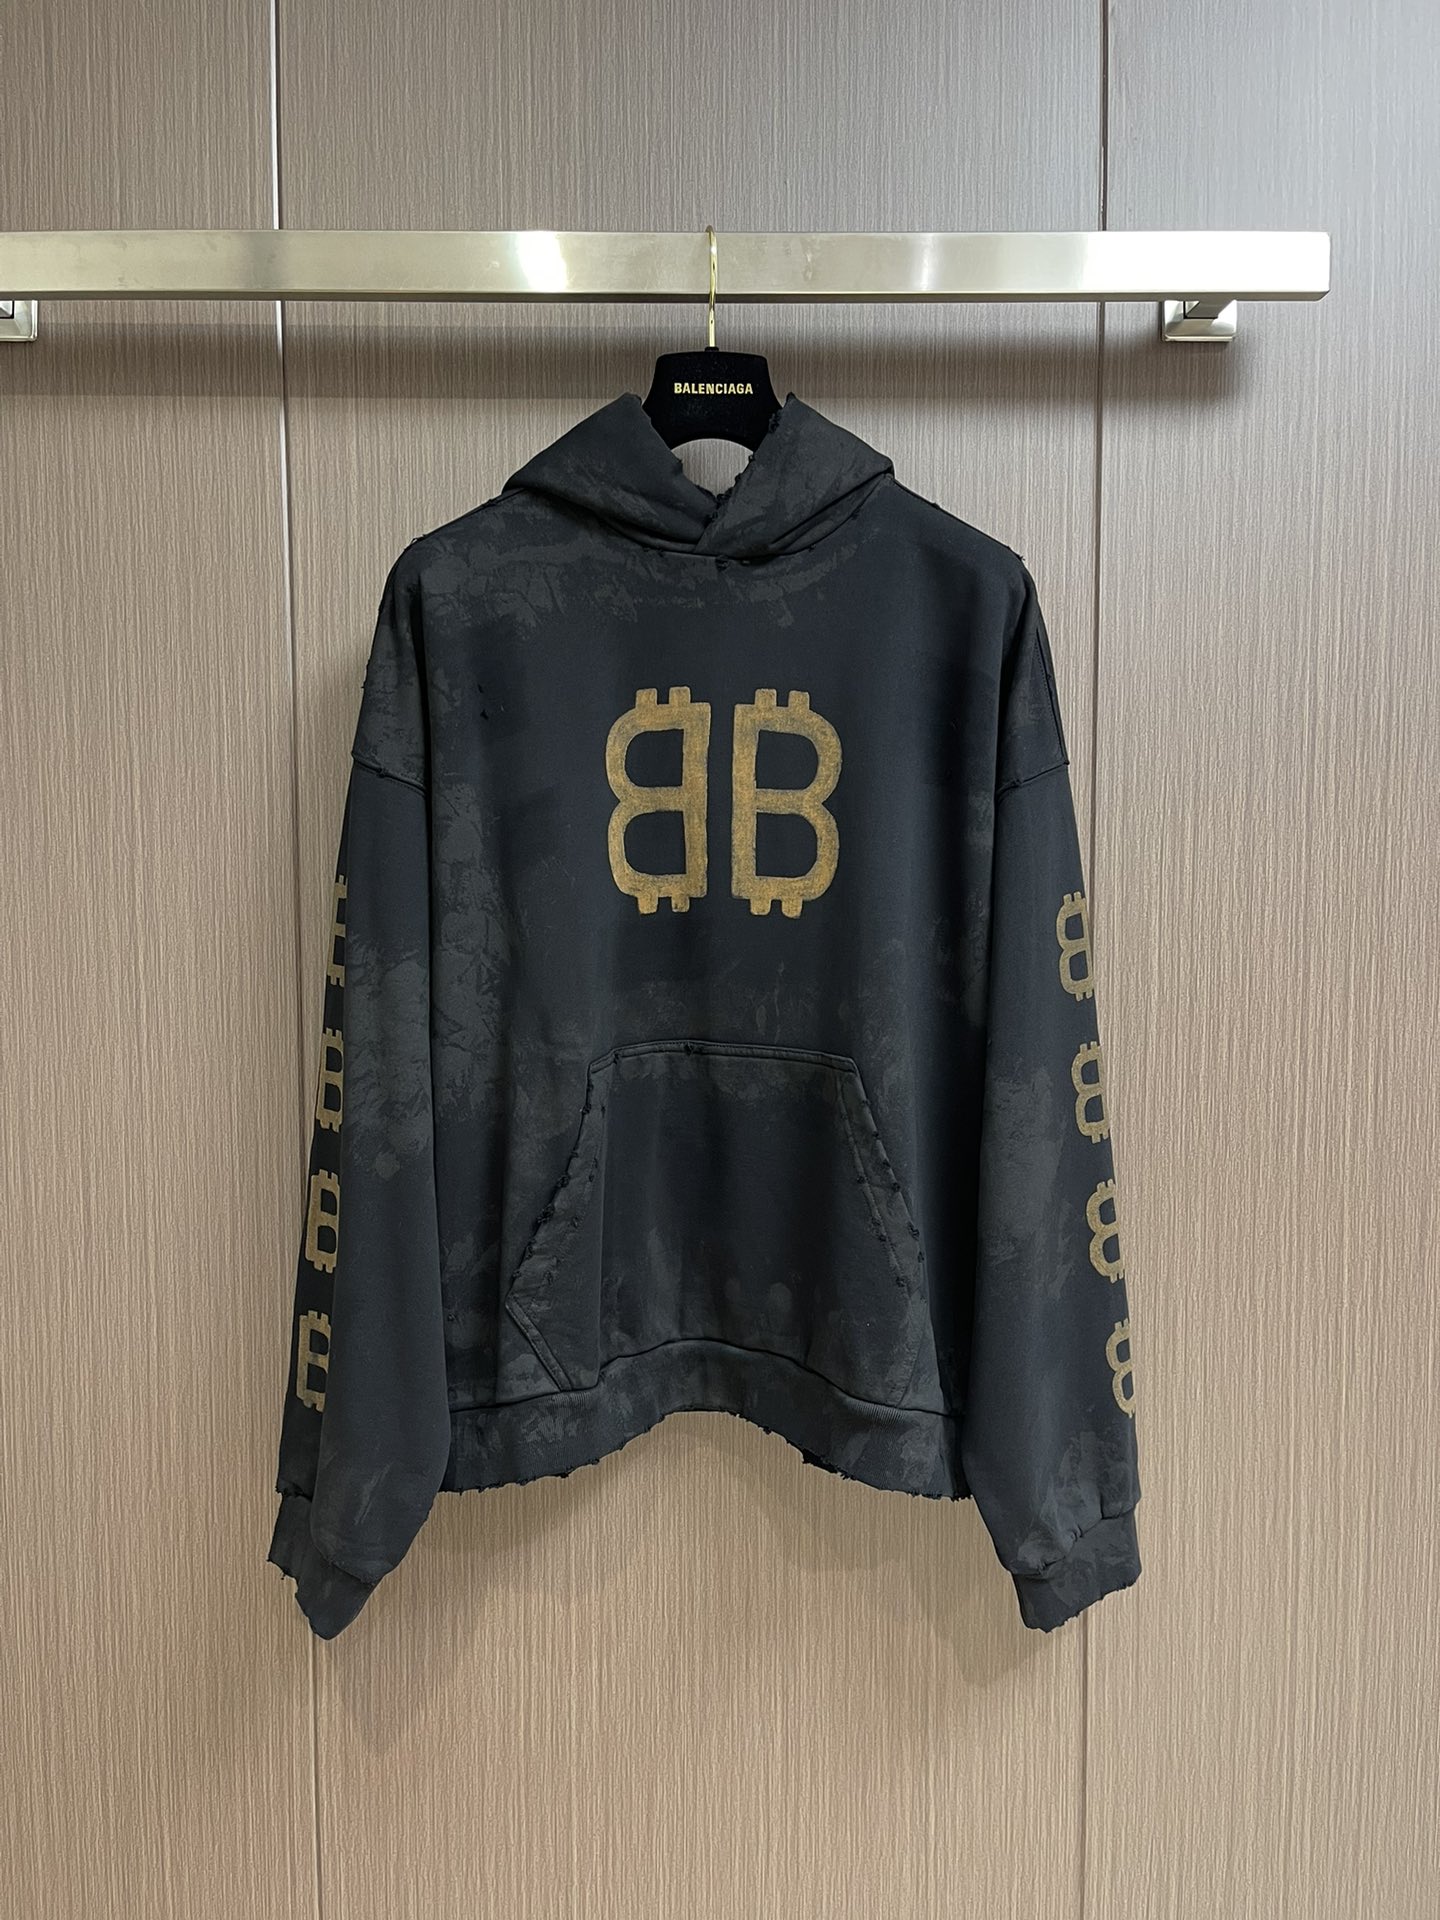 Balenciaga Clothing Hoodies Printing Combed Cotton Summer Collection Hooded Top